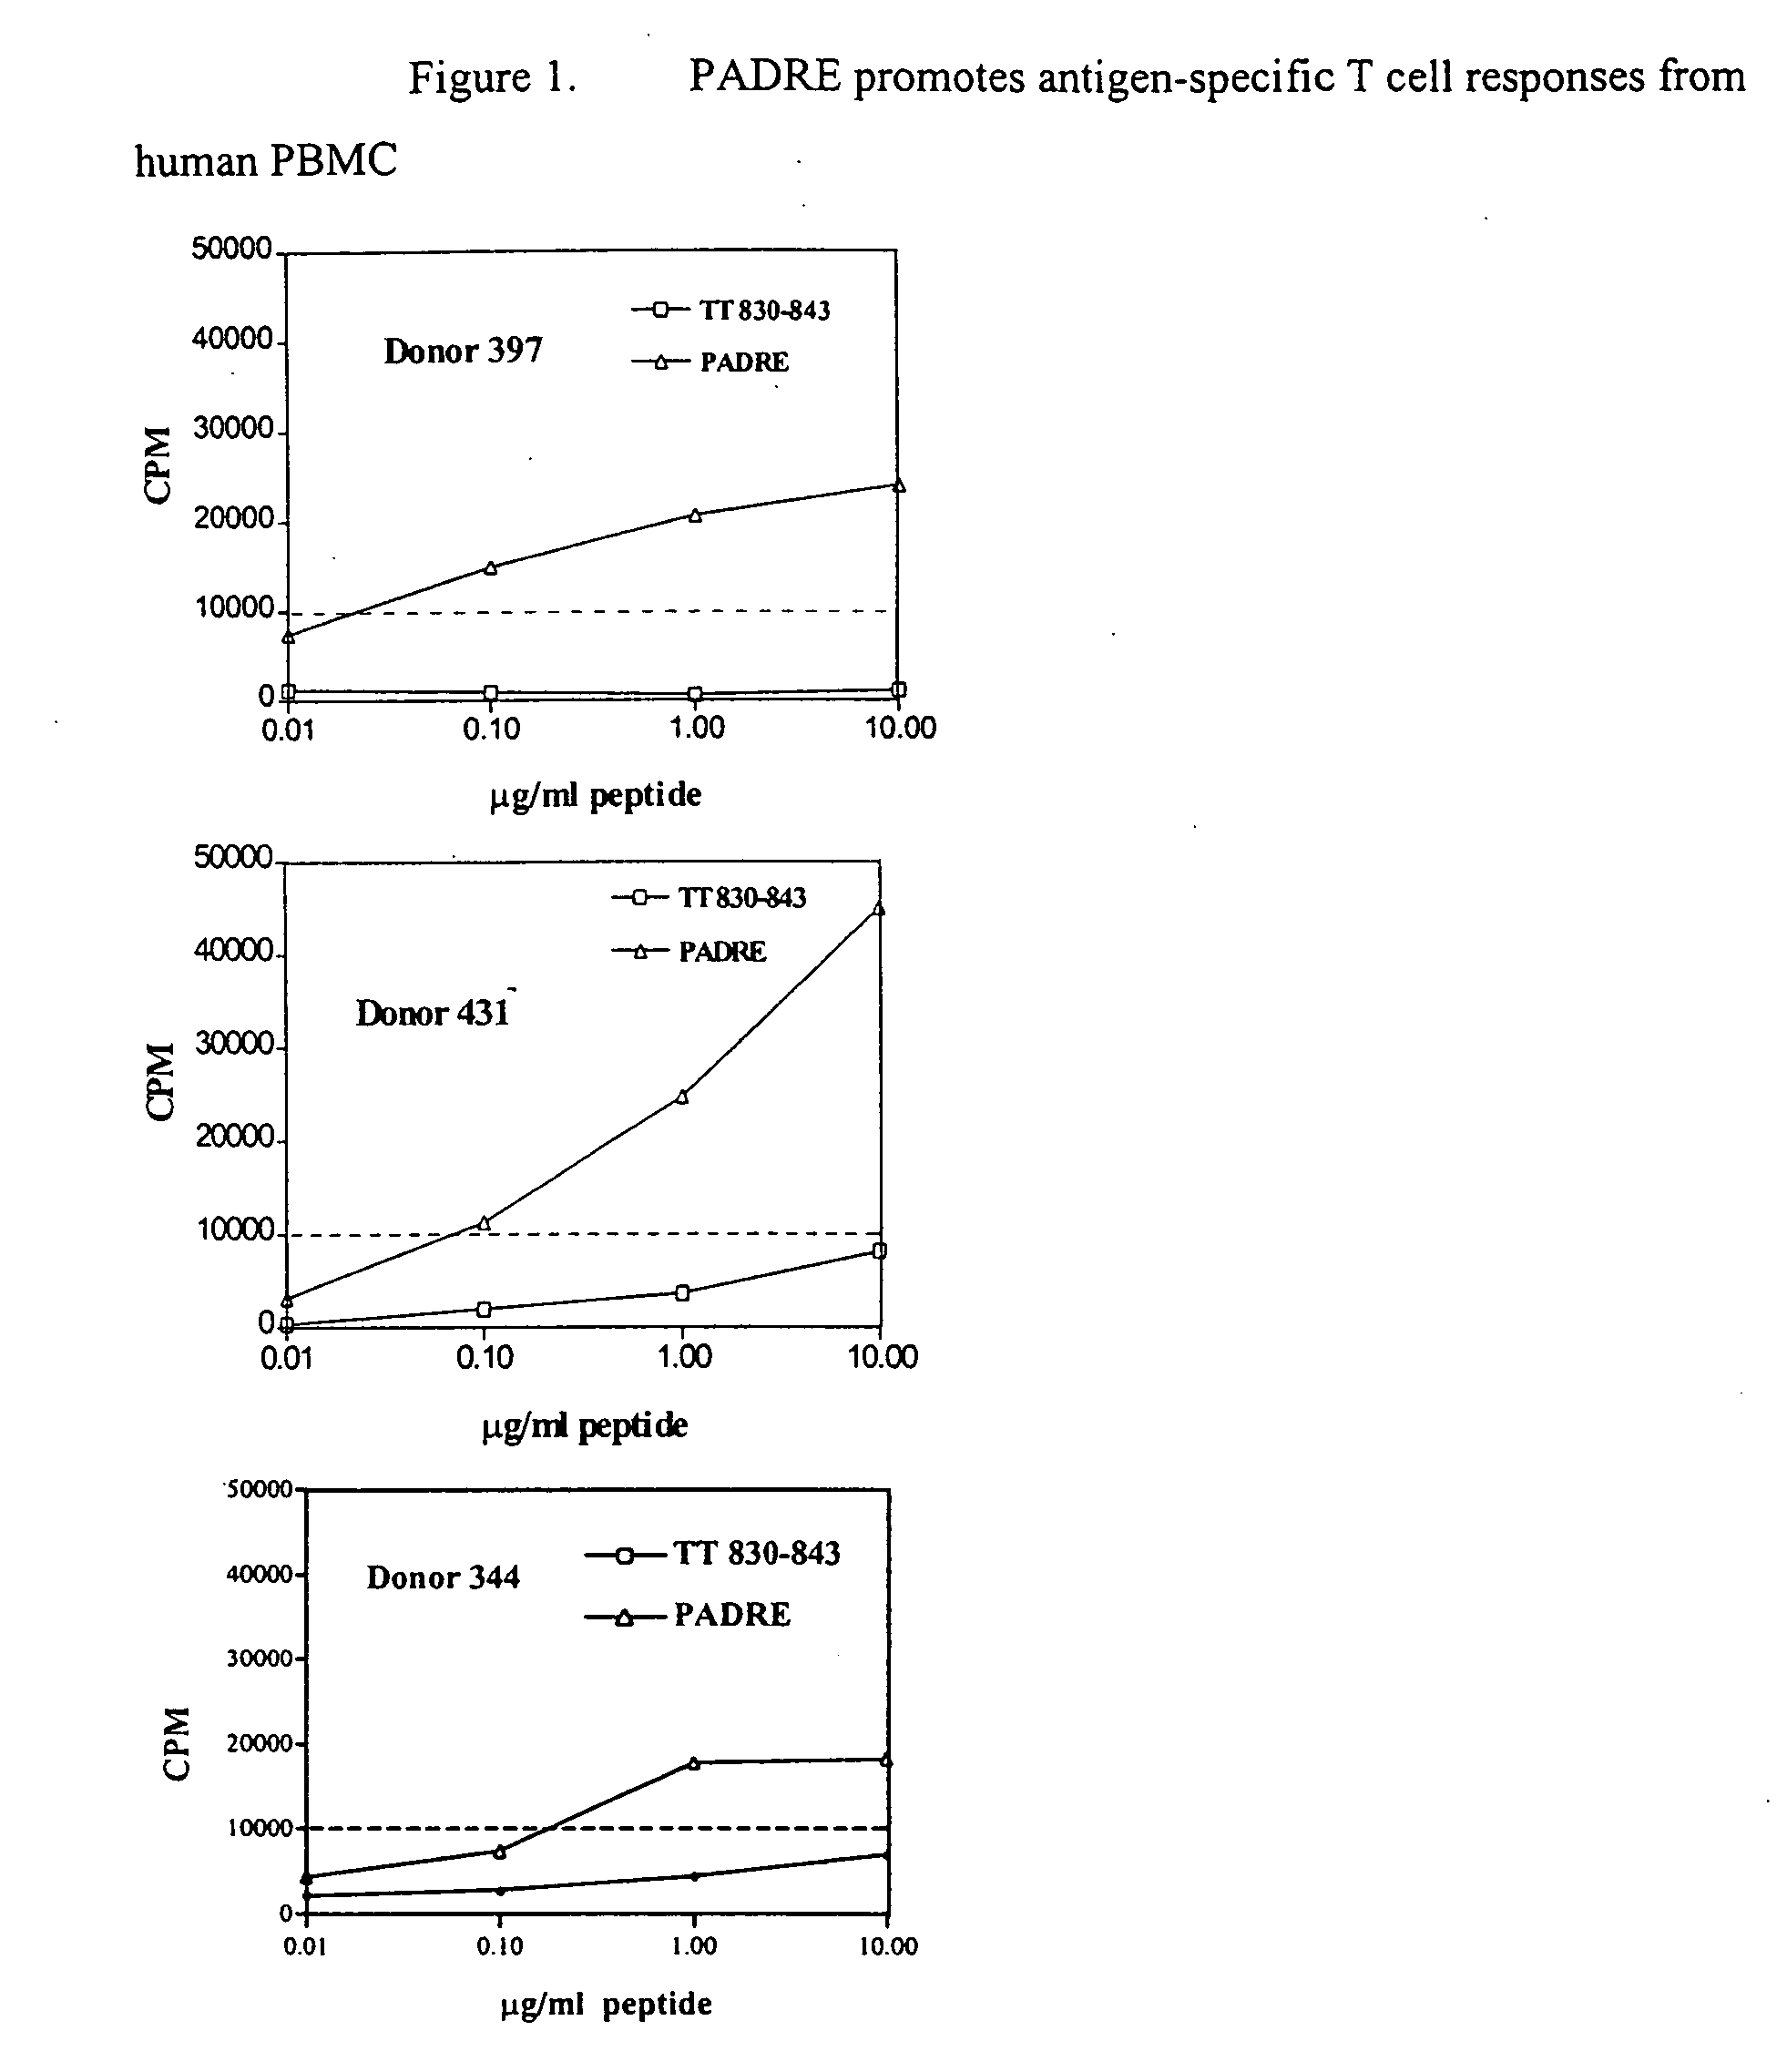 HLA class I A2 tumor associated antigen peptides and vaccine compositions